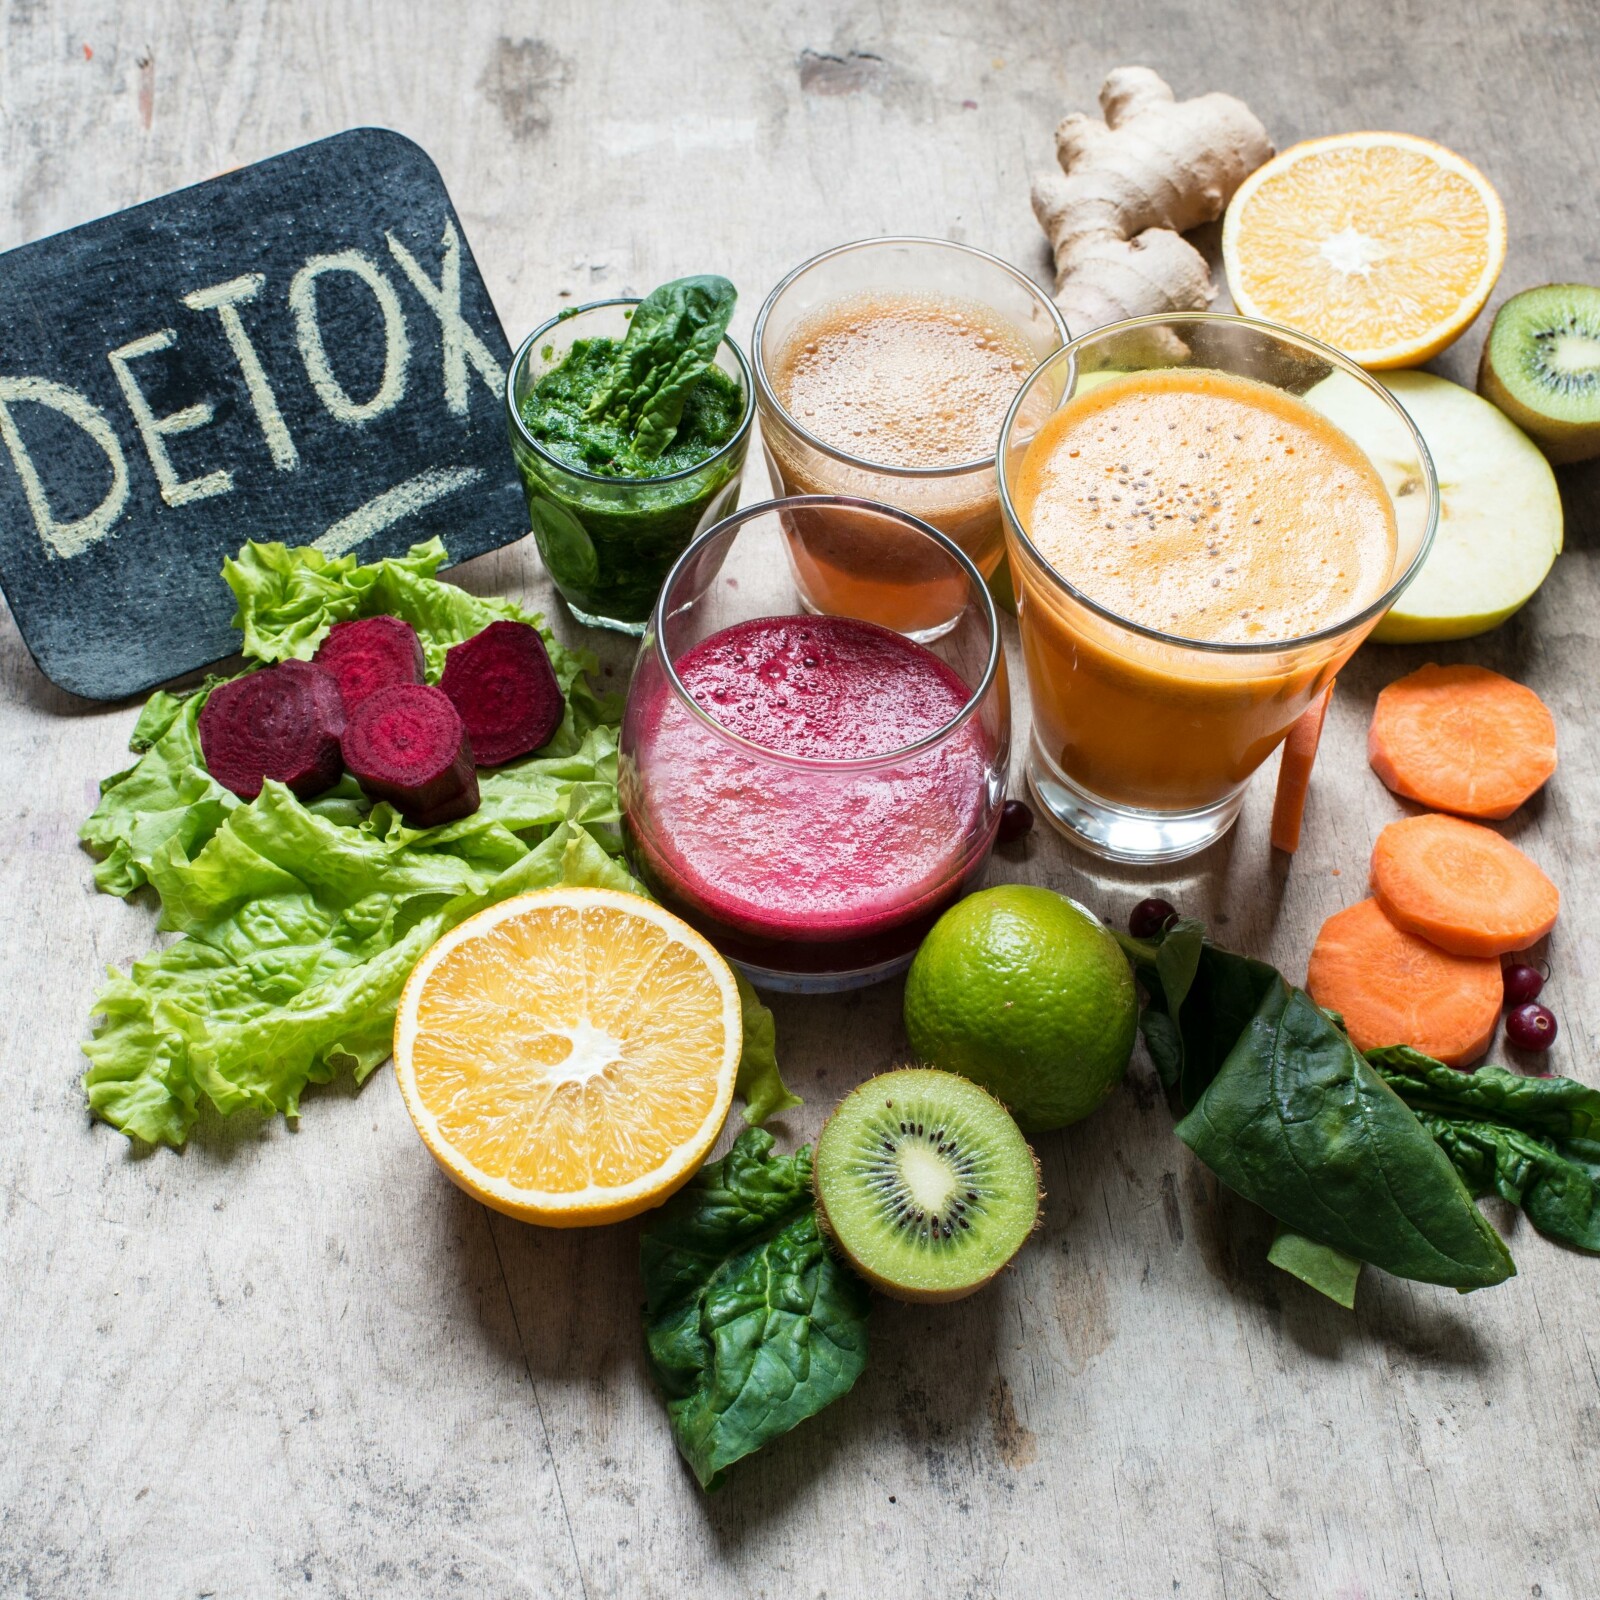 Can I really do a healthy detox without going on strict detox diets?